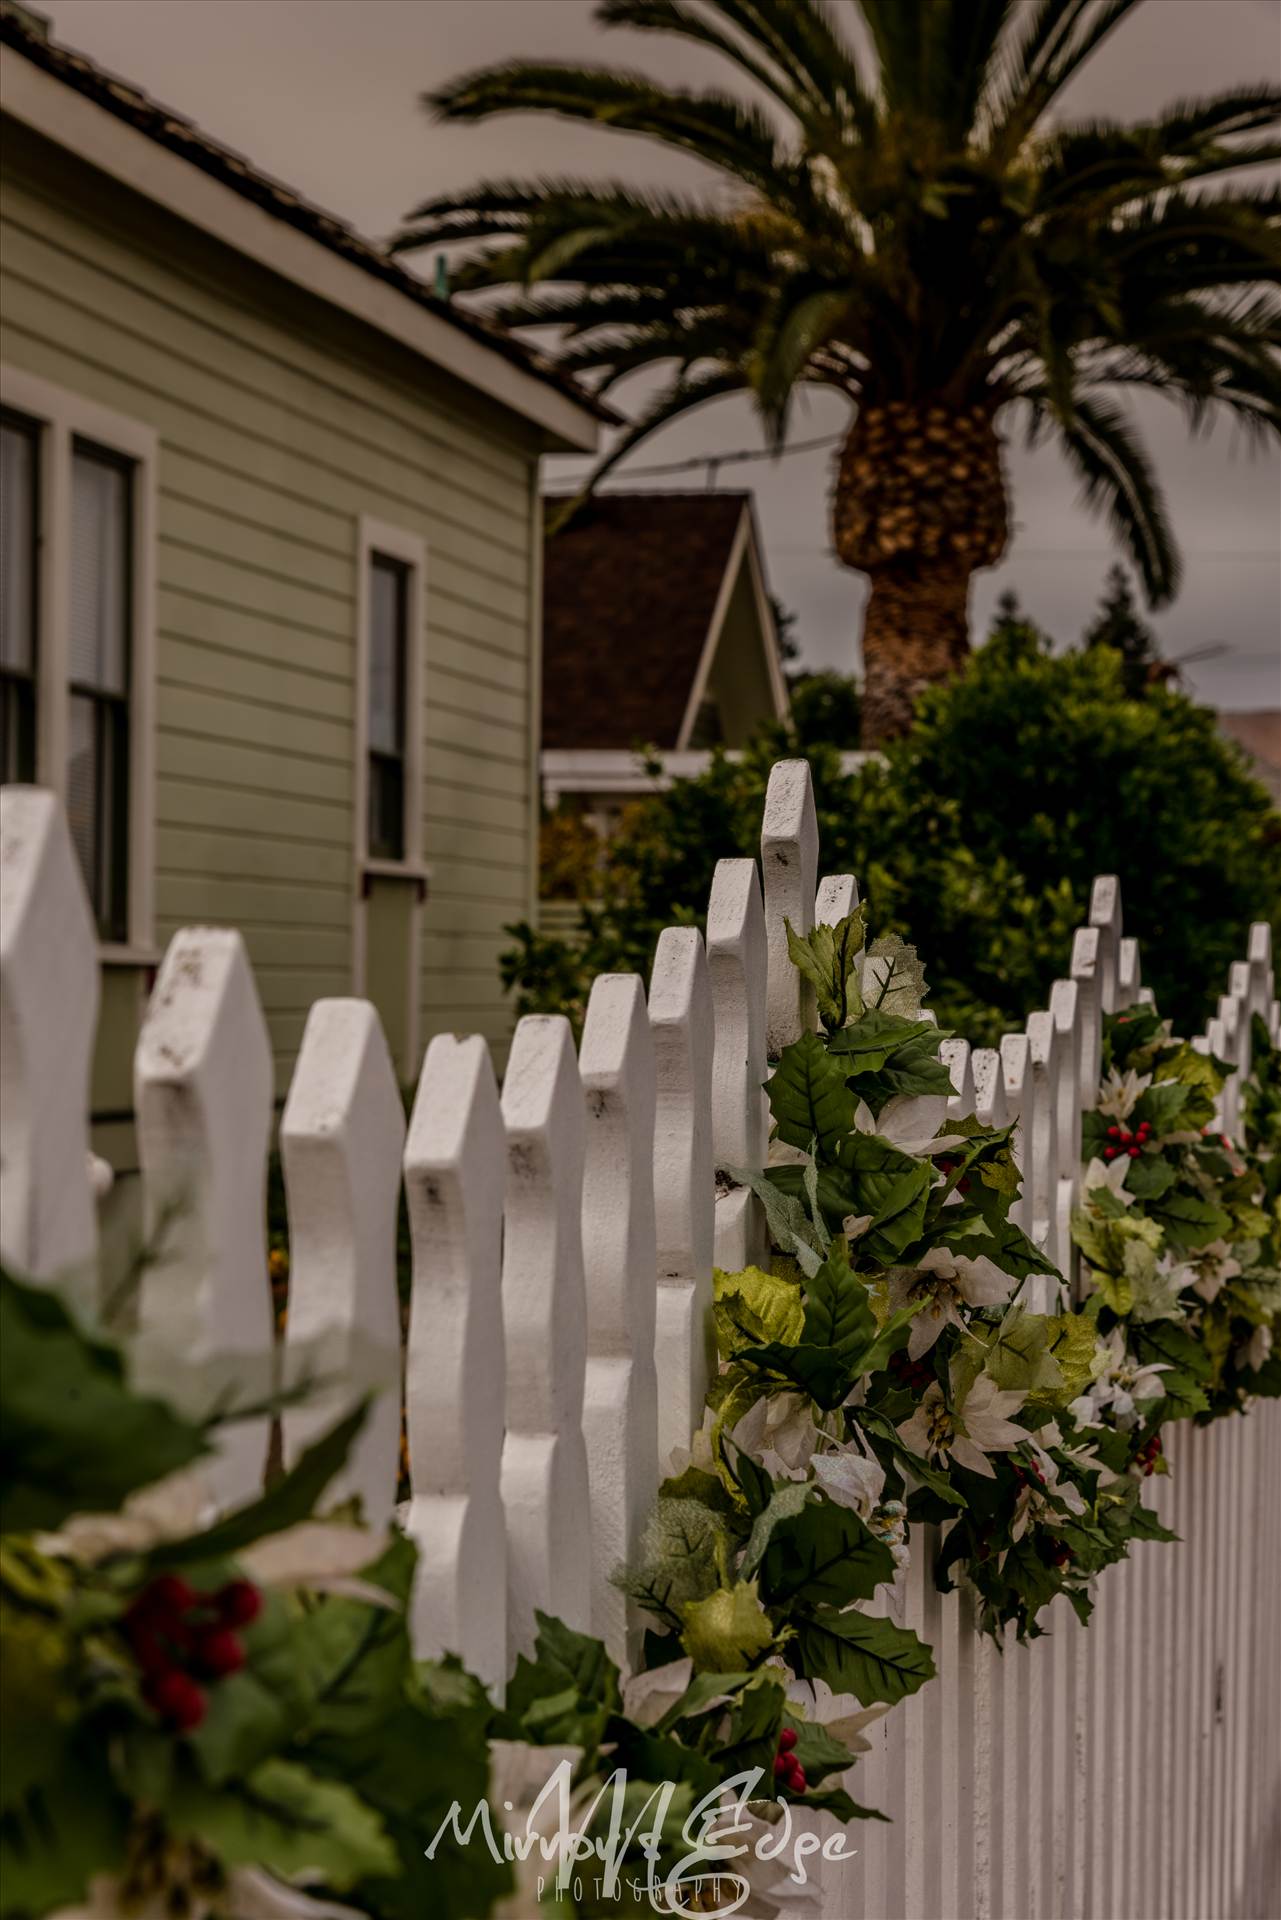 Holiday Picket Fence.jpg undefined by Sarah Williams